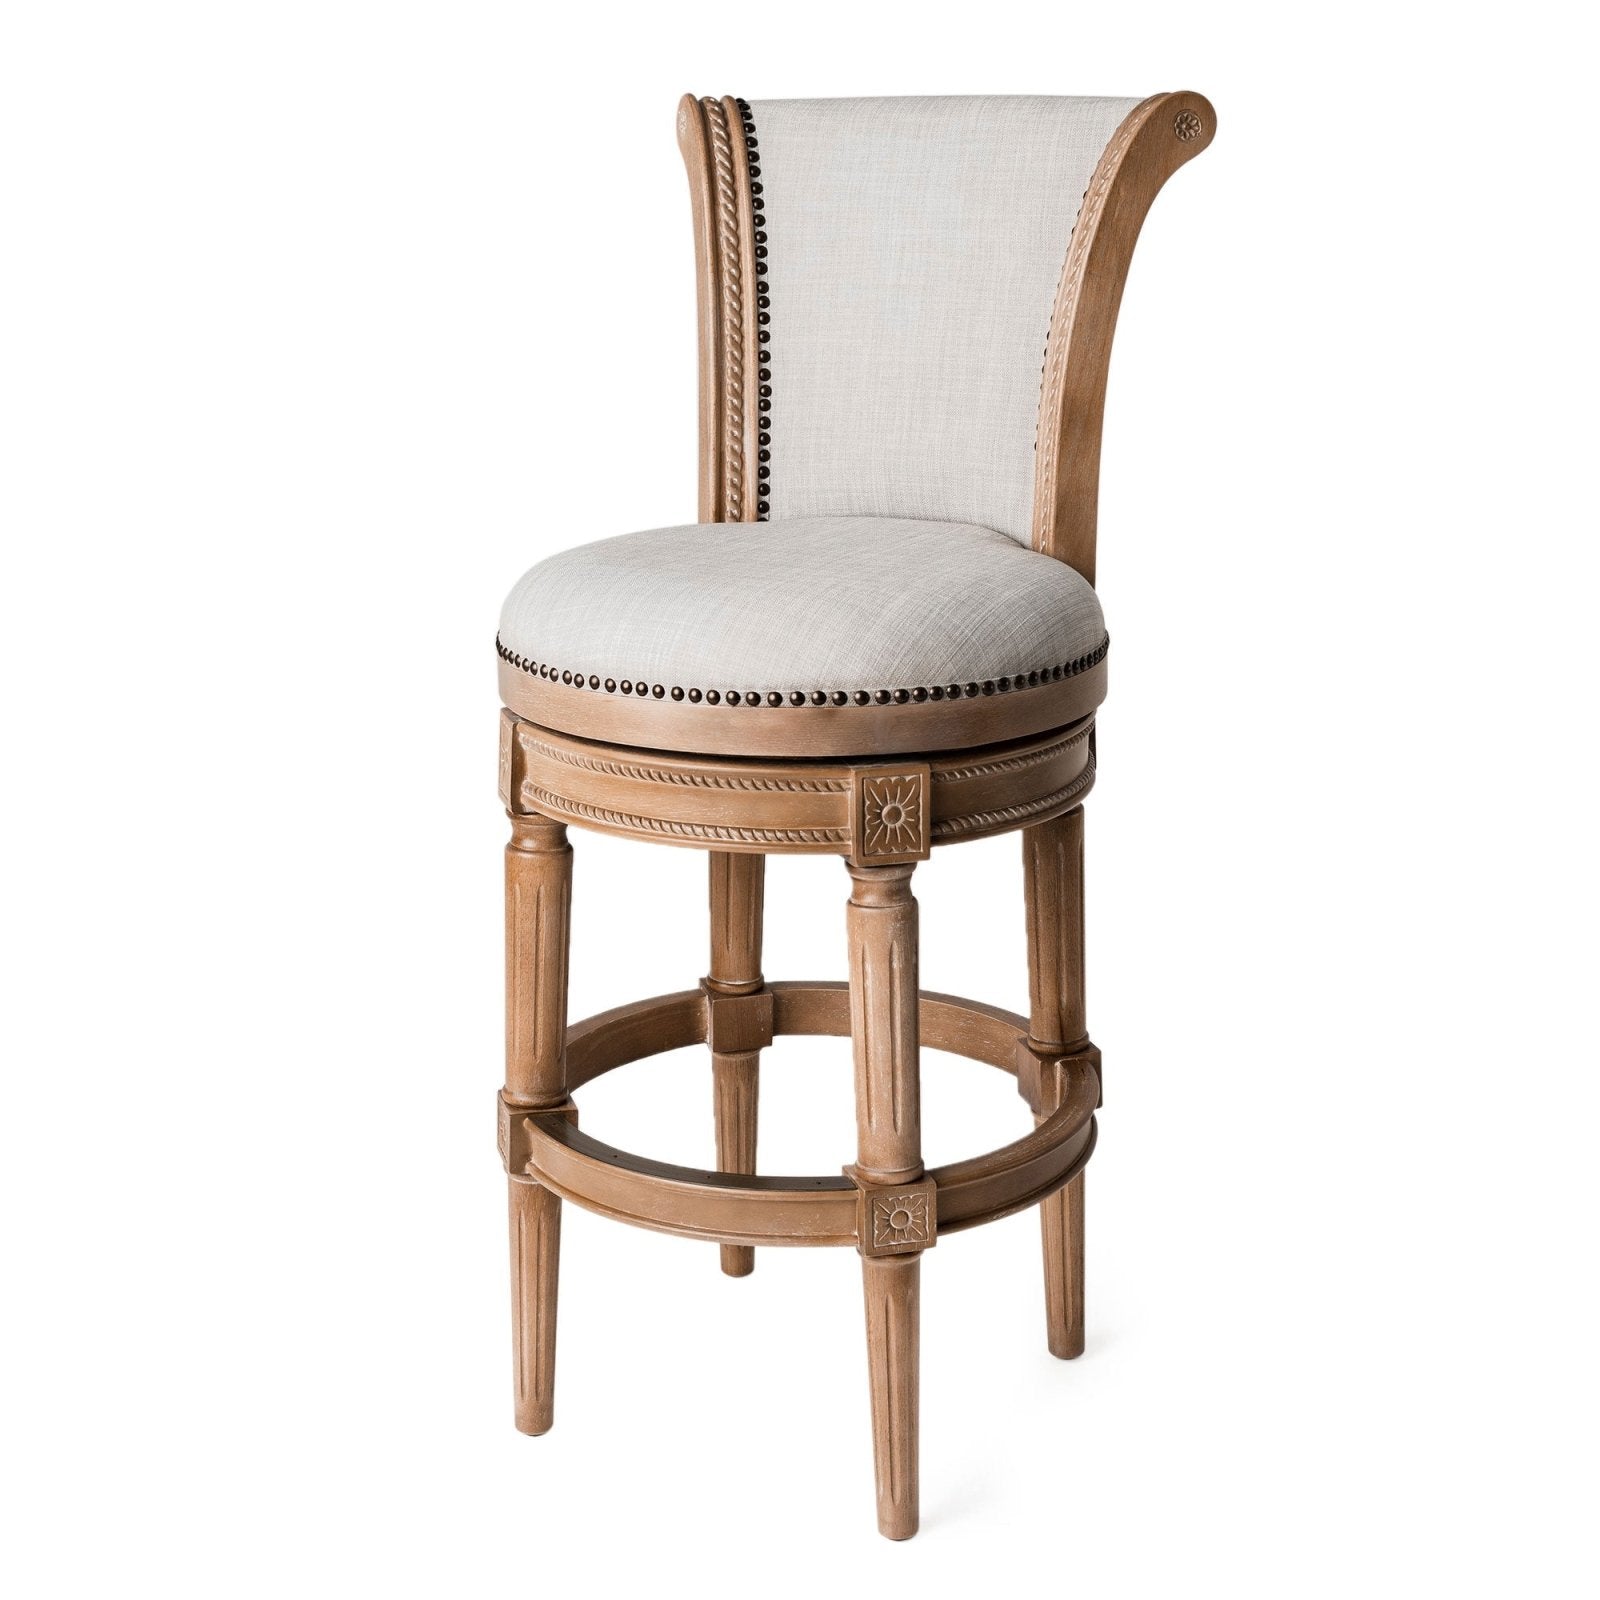 Pullman Bar Stool in Weathered Oak Finish with Sand Color Fabric Upholstery in Stools by Maven Lane